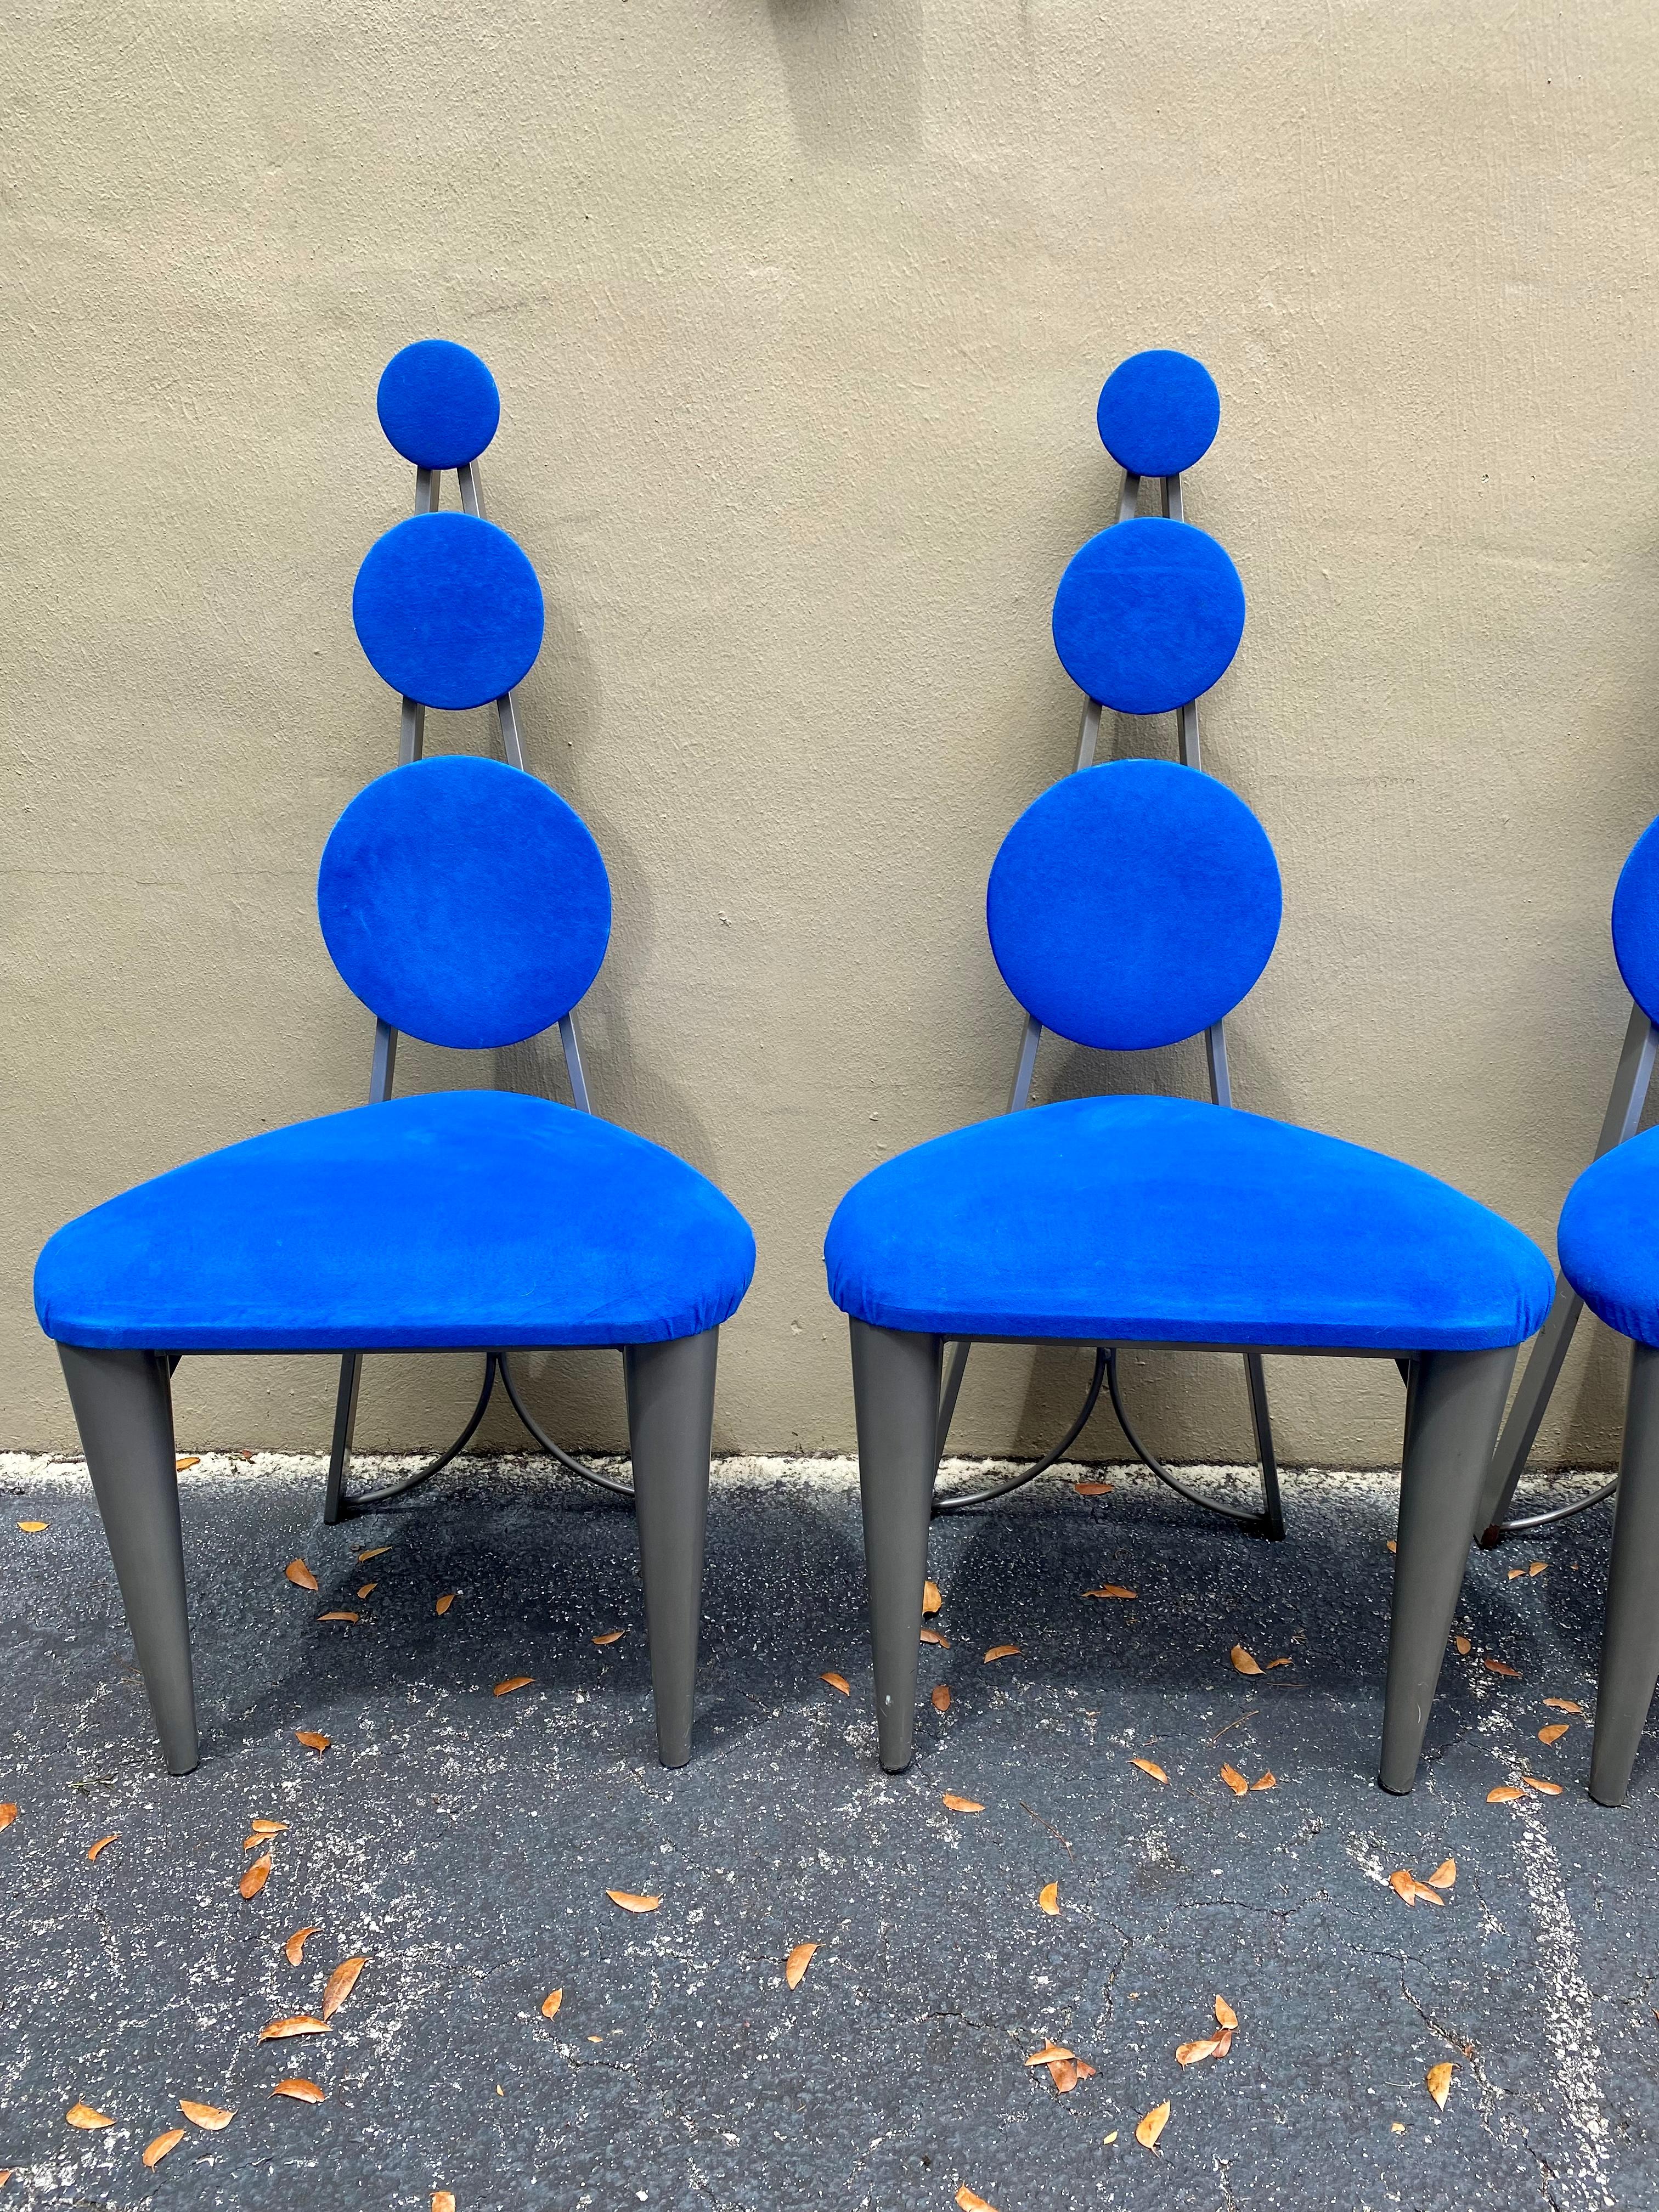 1990s Multi-Colored Sculptural Memphis Style Dining Table & 6 Chairs For Sale 3